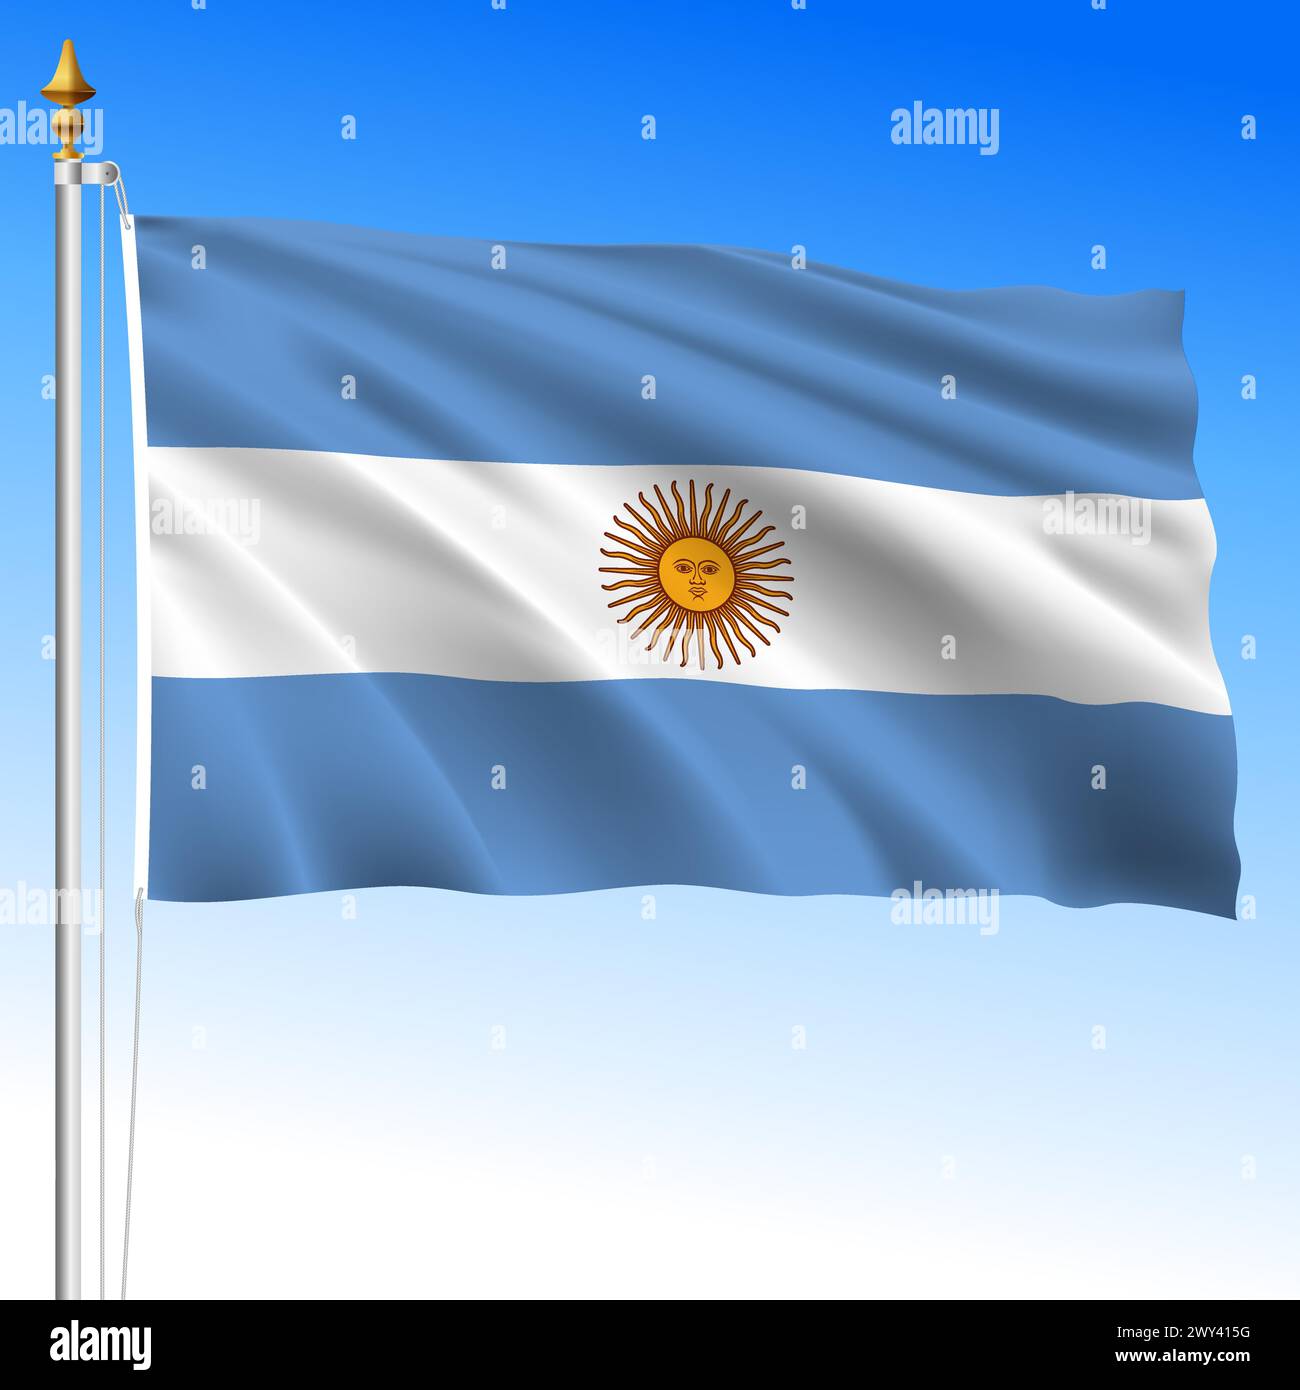 Argentina, official national waving flag, south america, vector illustration Stock Vector